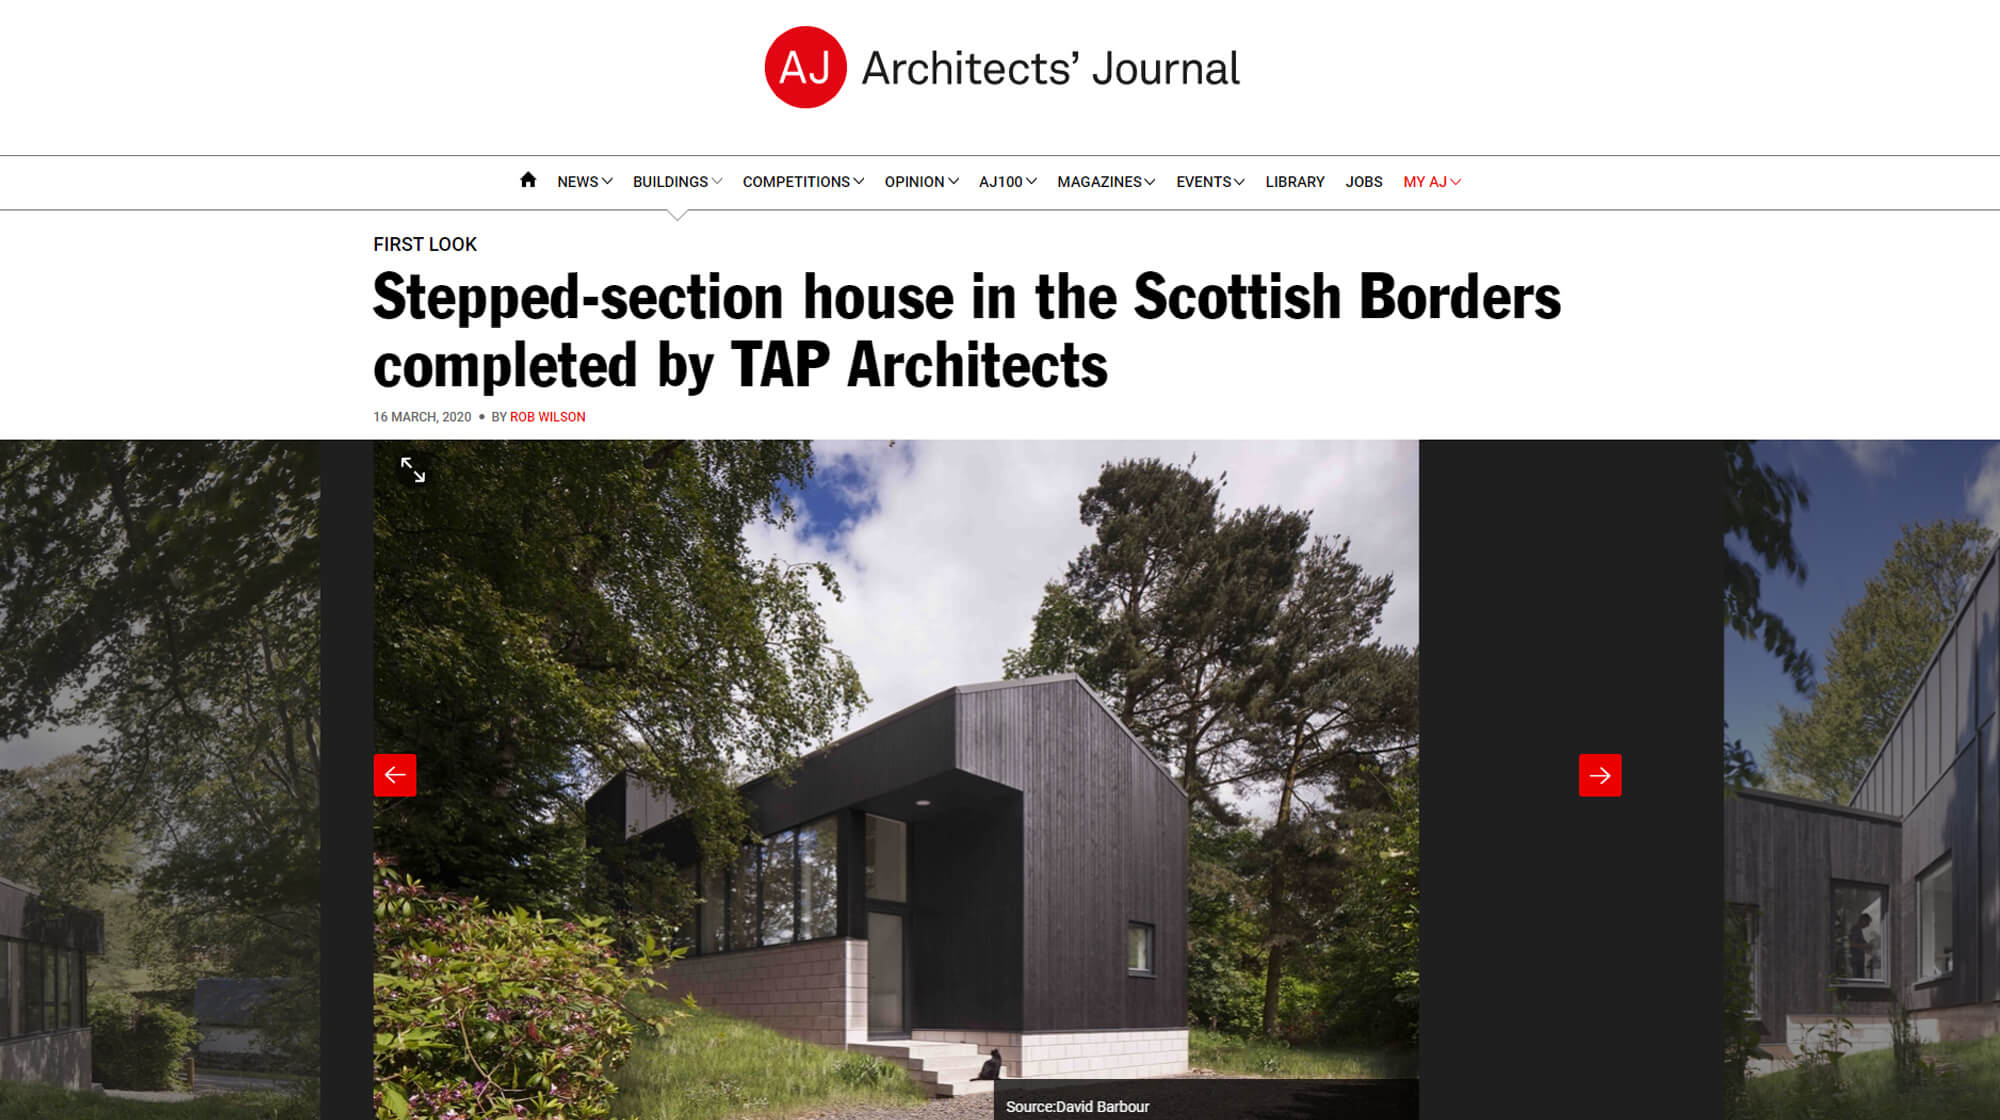 The Architects’ Journal feature Woodland House, 